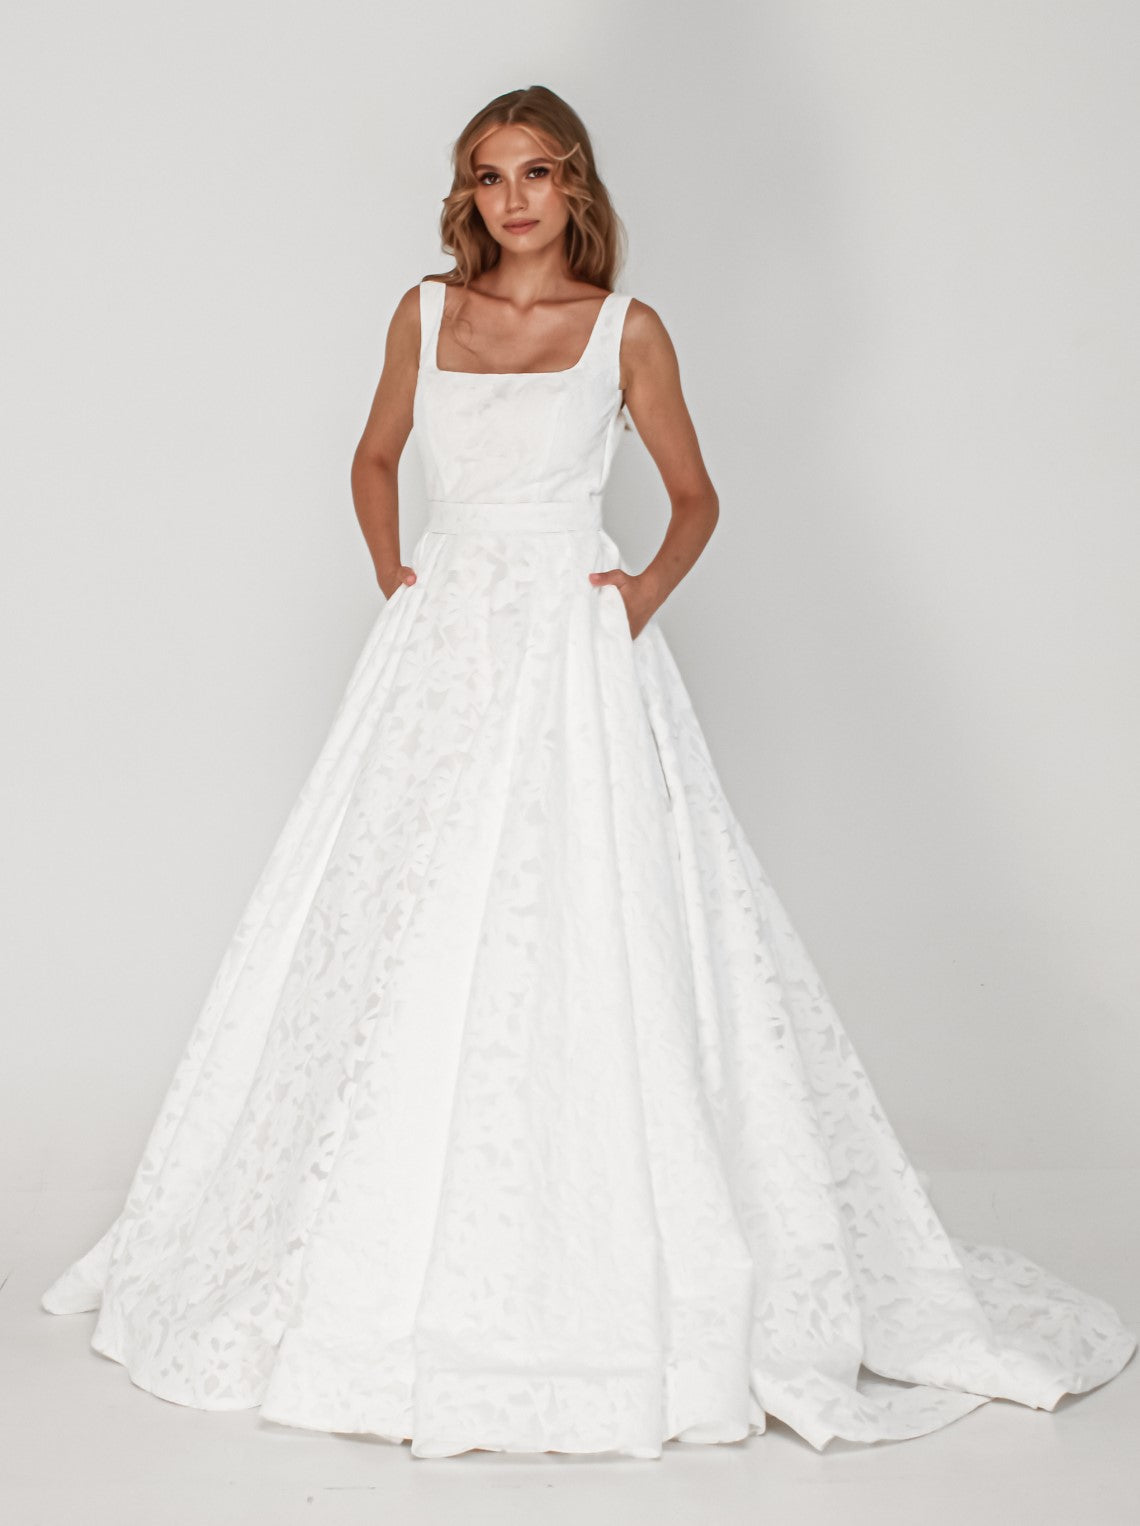 Floral Jacquard A-line Wedding Dress With Square Neckline And Front Slit